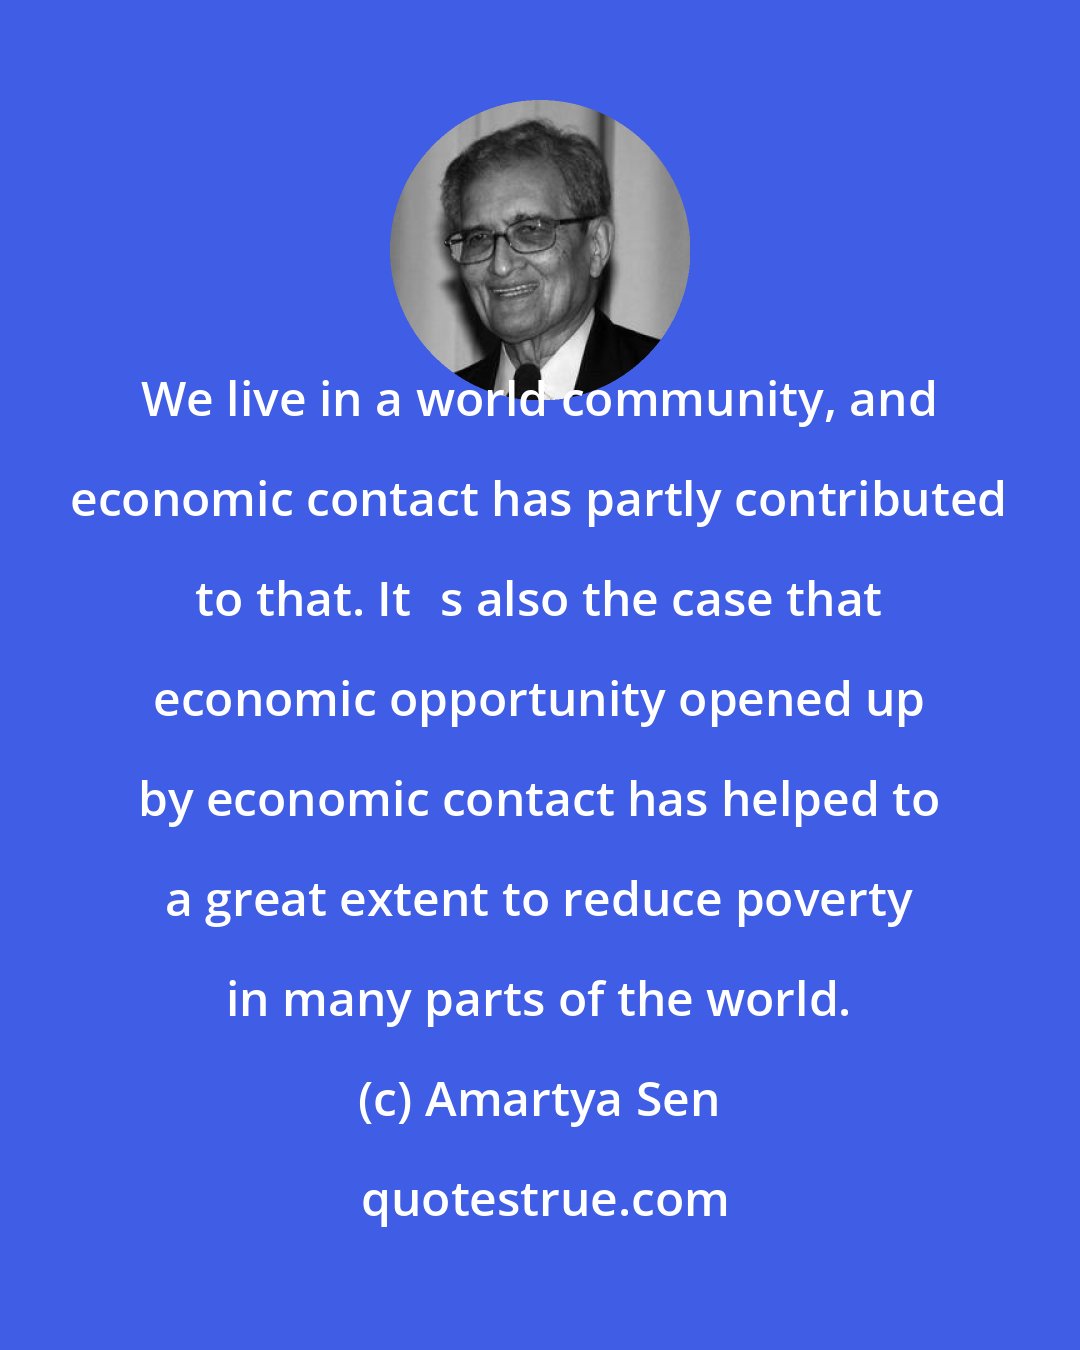 Amartya Sen: We live in a world community, and economic contact has partly contributed to that. Its also the case that economic opportunity opened up by economic contact has helped to a great extent to reduce poverty in many parts of the world.